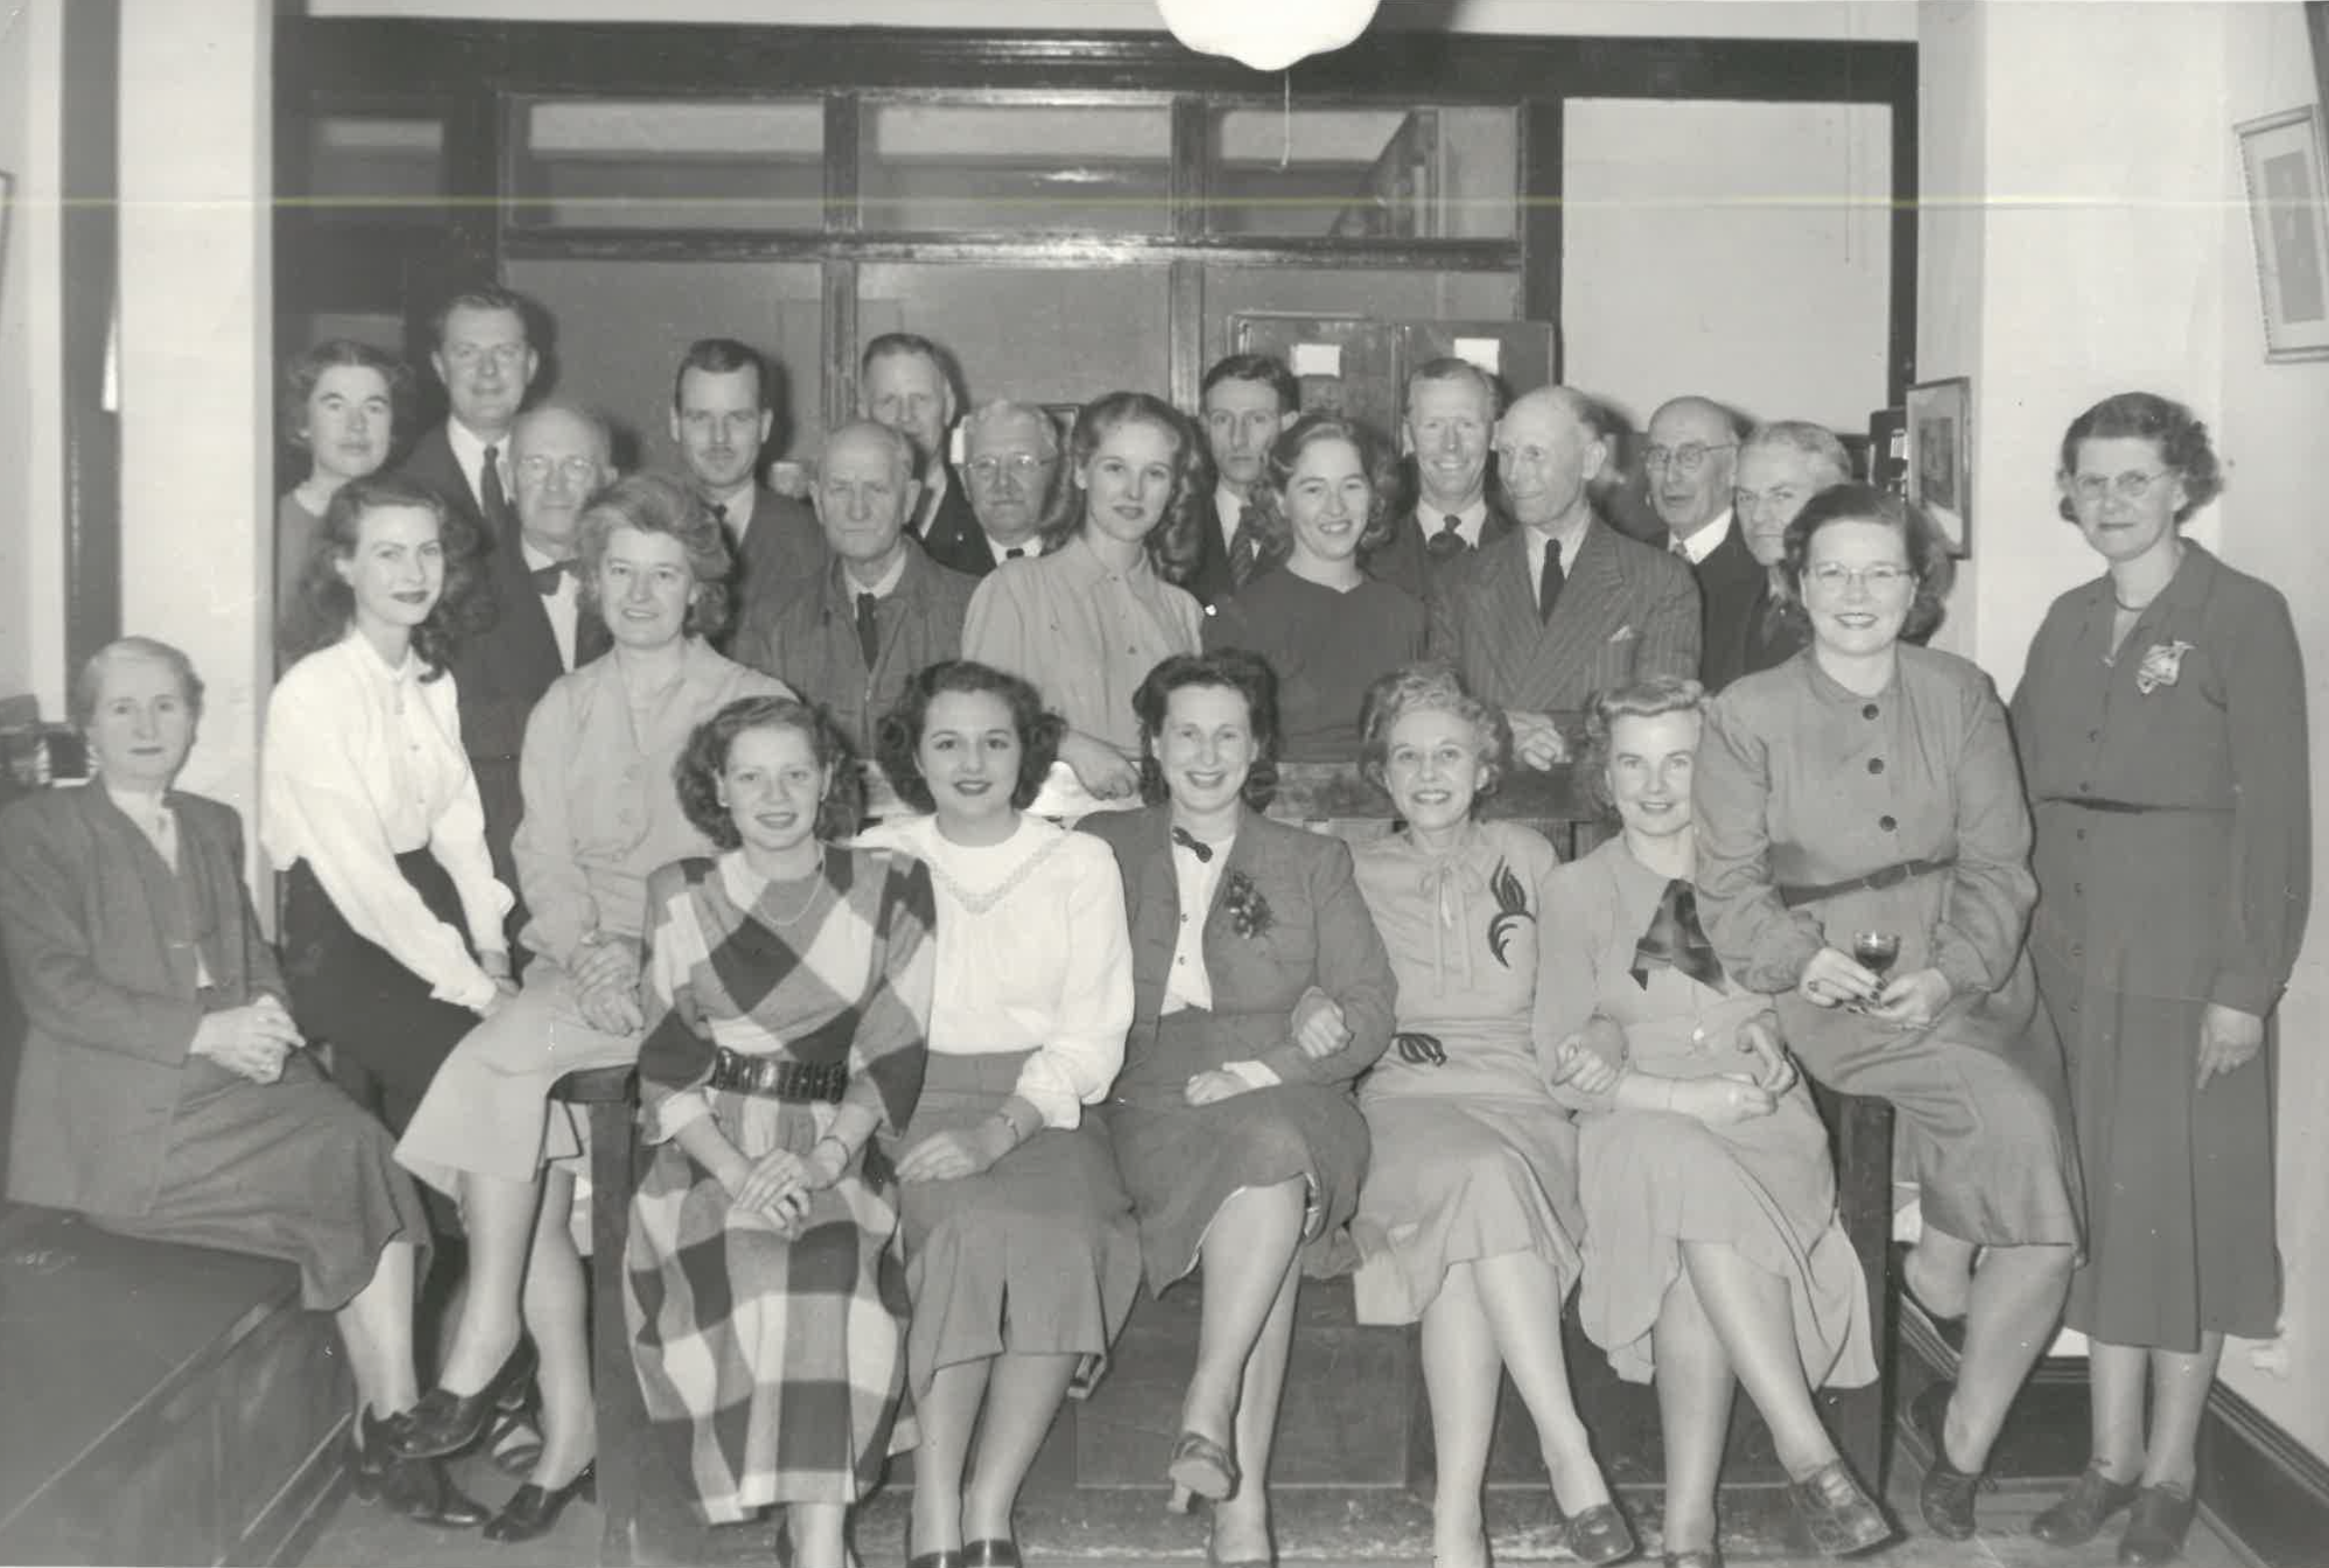 Crease Harman's 1948 holiday party at our former offices in the Law Courts Building in Bastion Square featuring our lawyers and their legal assistants